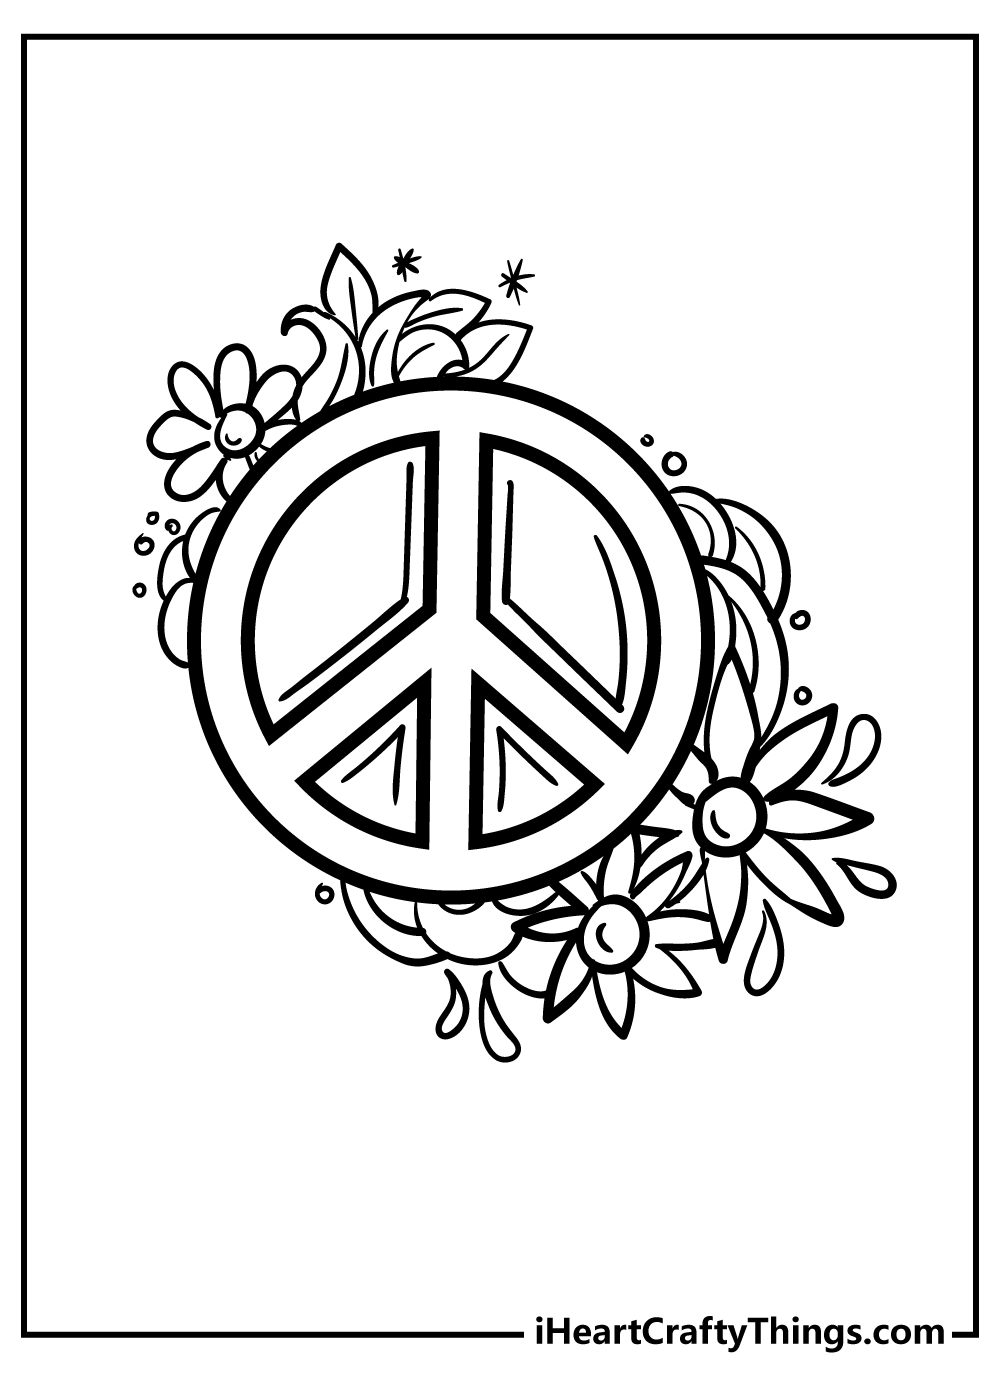 Peace Coloring Pages for preschoolers free printable